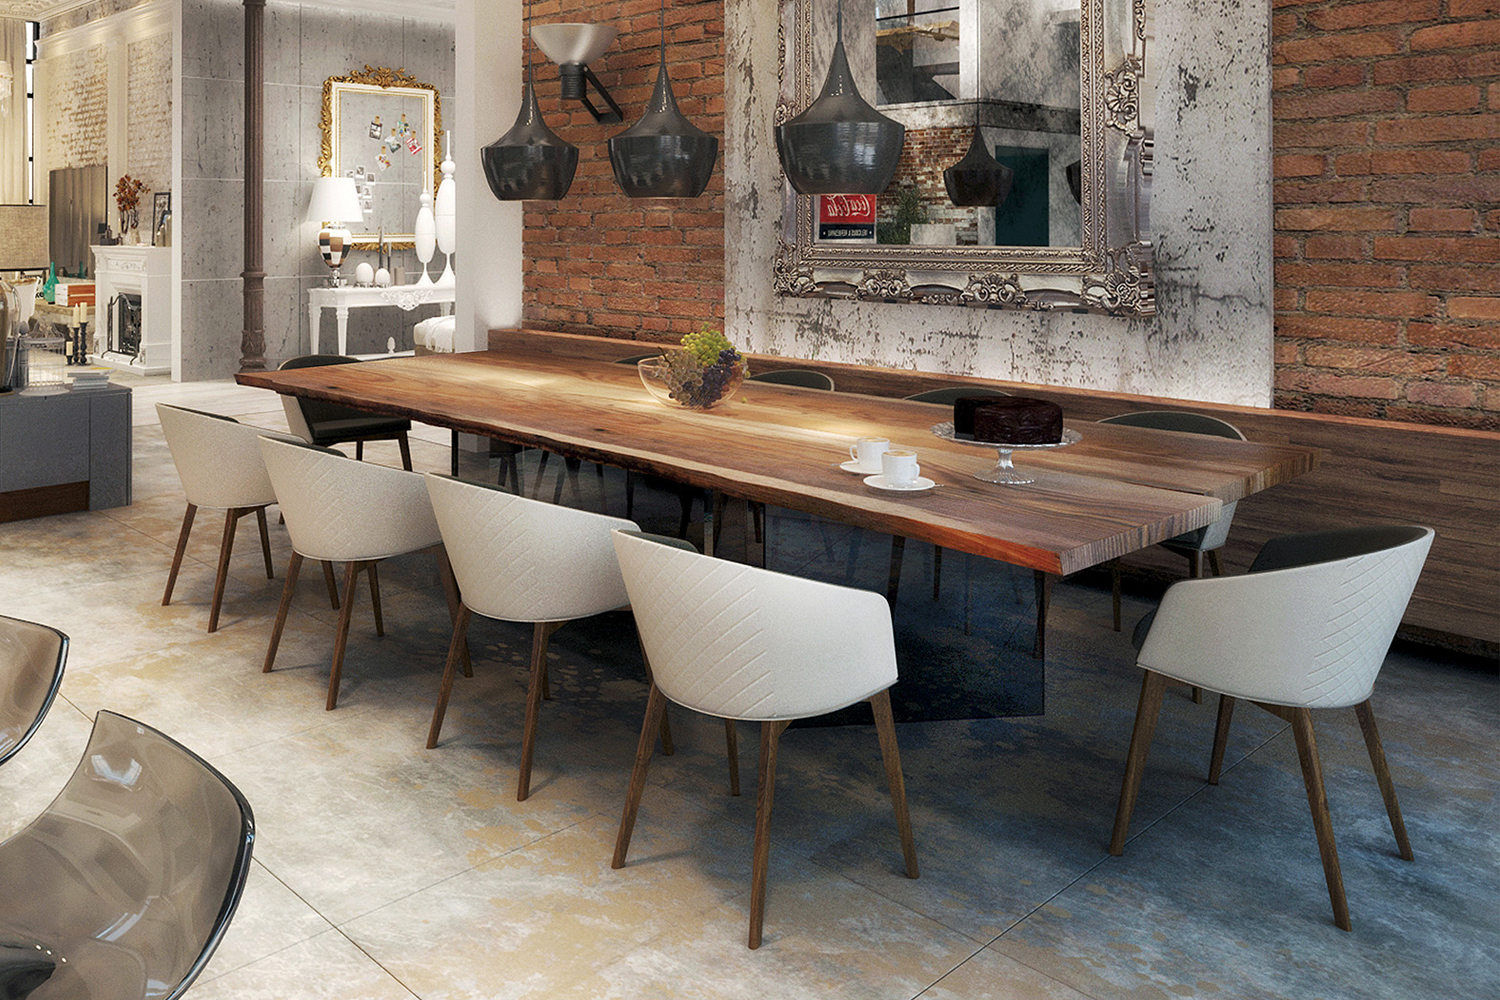 Luxury Dining Room Sets, Dining Table And Chairs Uk